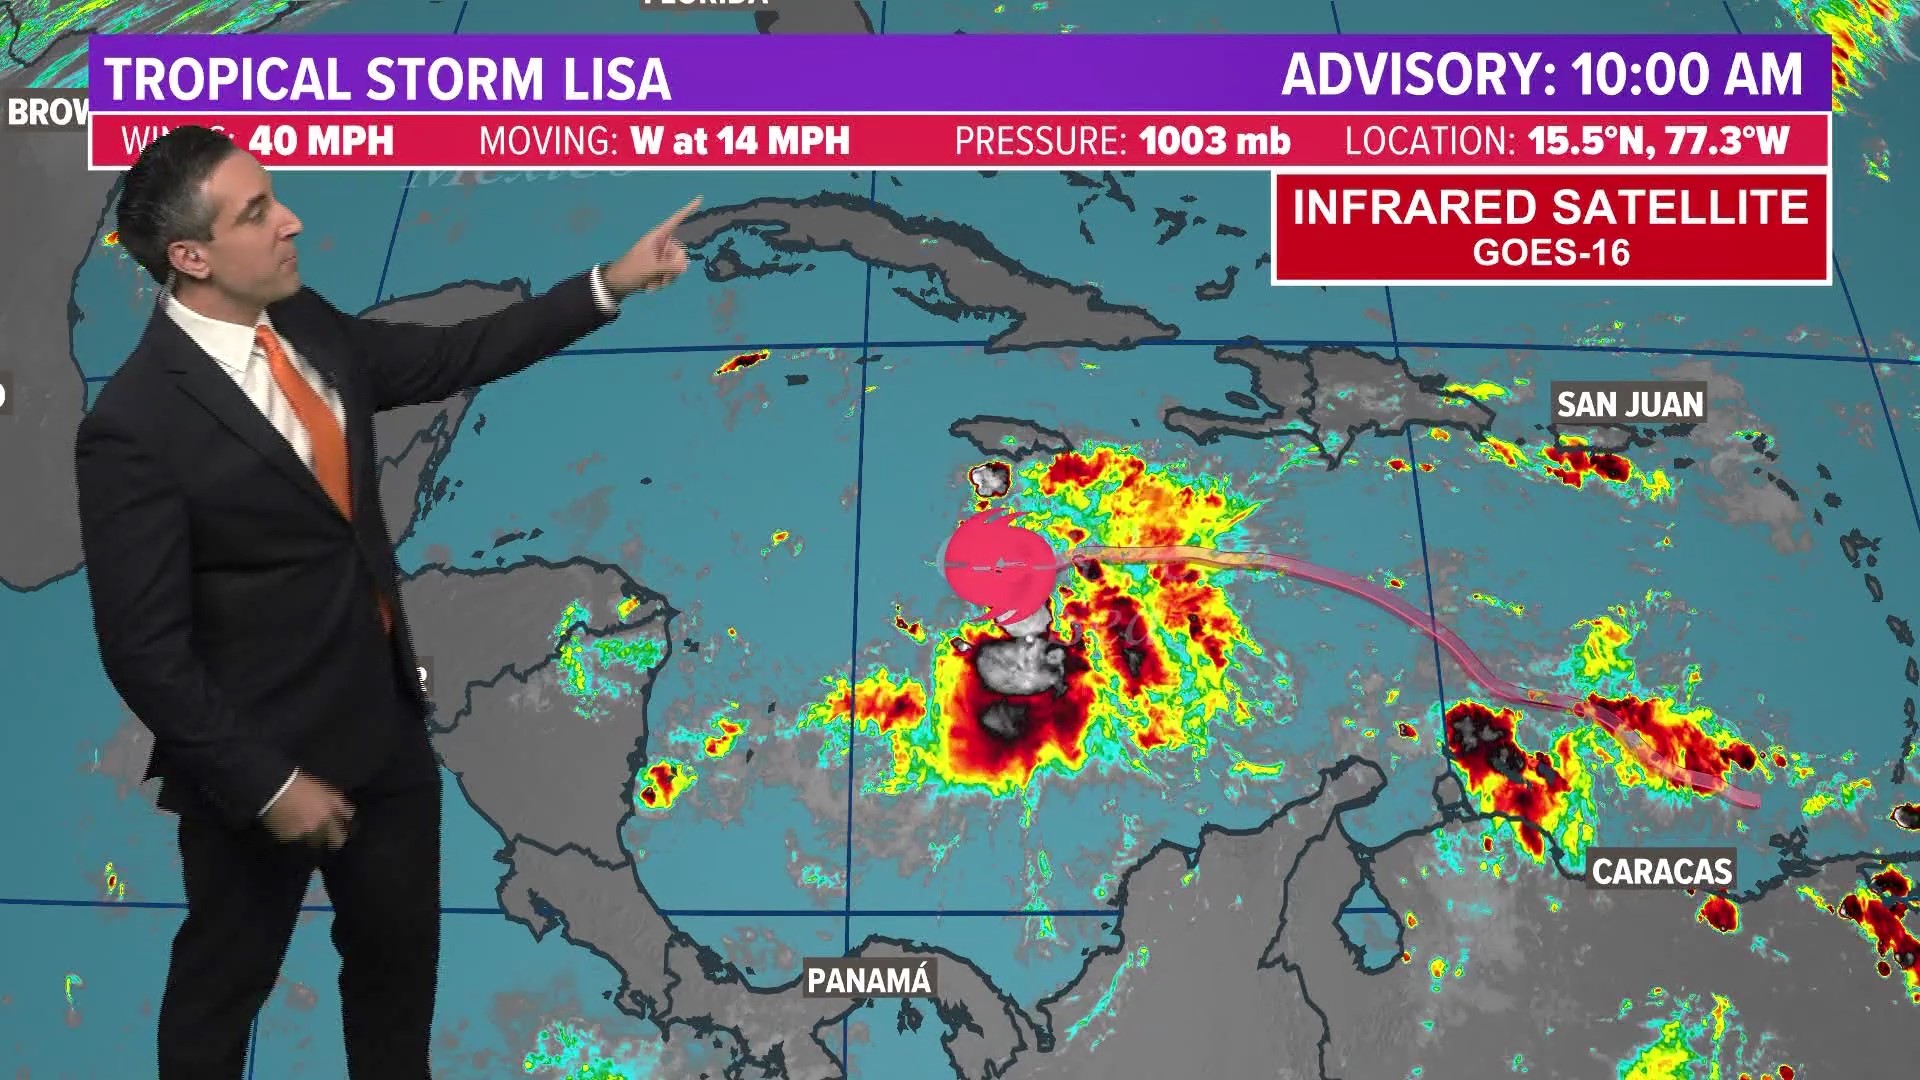 Tropical Storm Lisa in the central Caribbean Sea. Expected to gradually strengthen over the next few days.